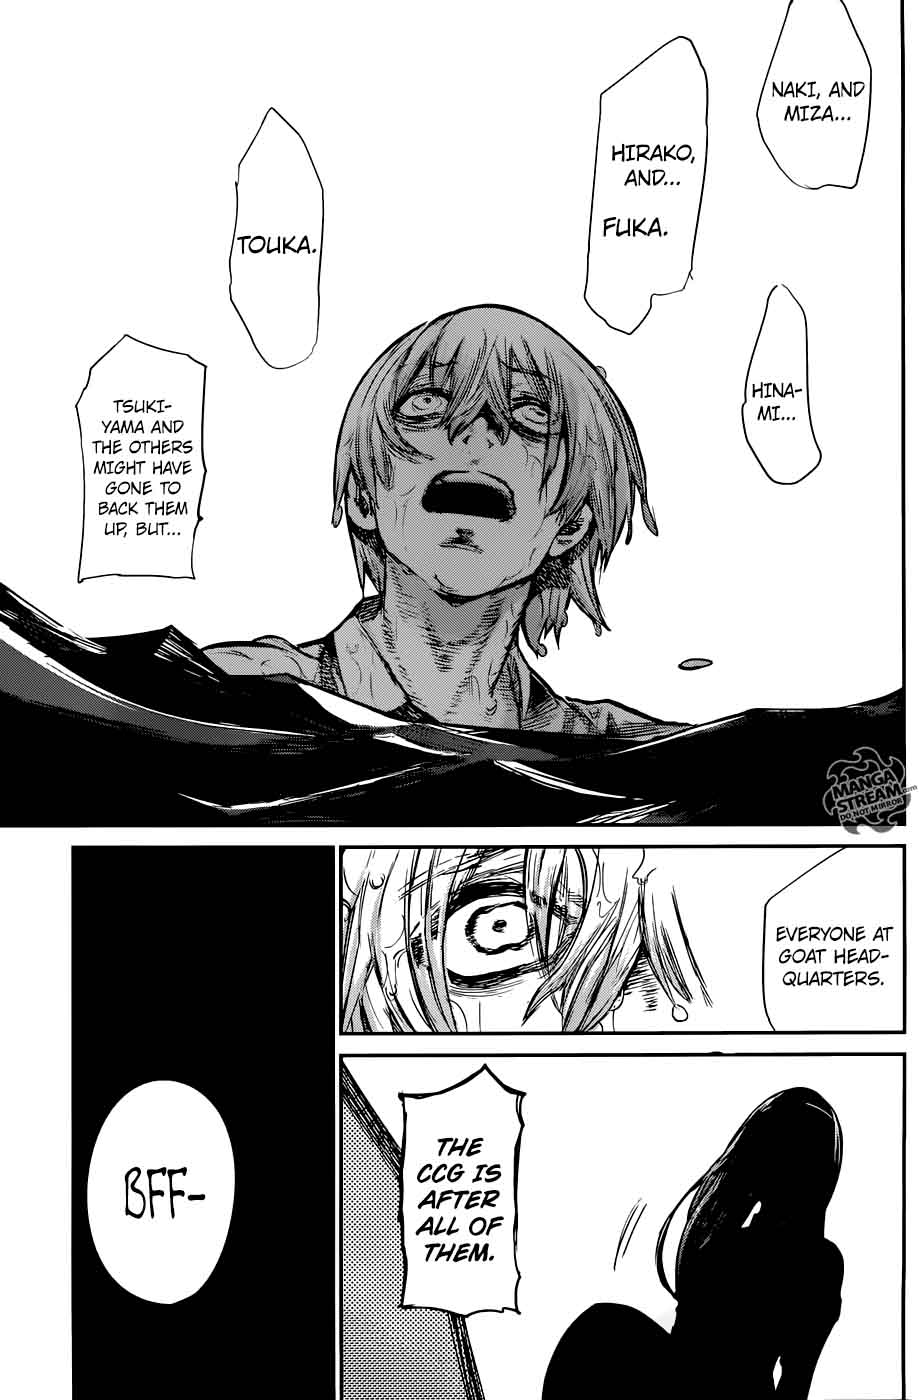 Tokyo Ghoul Re Chapter 158 Right Tokyo Ghoul Manga Online